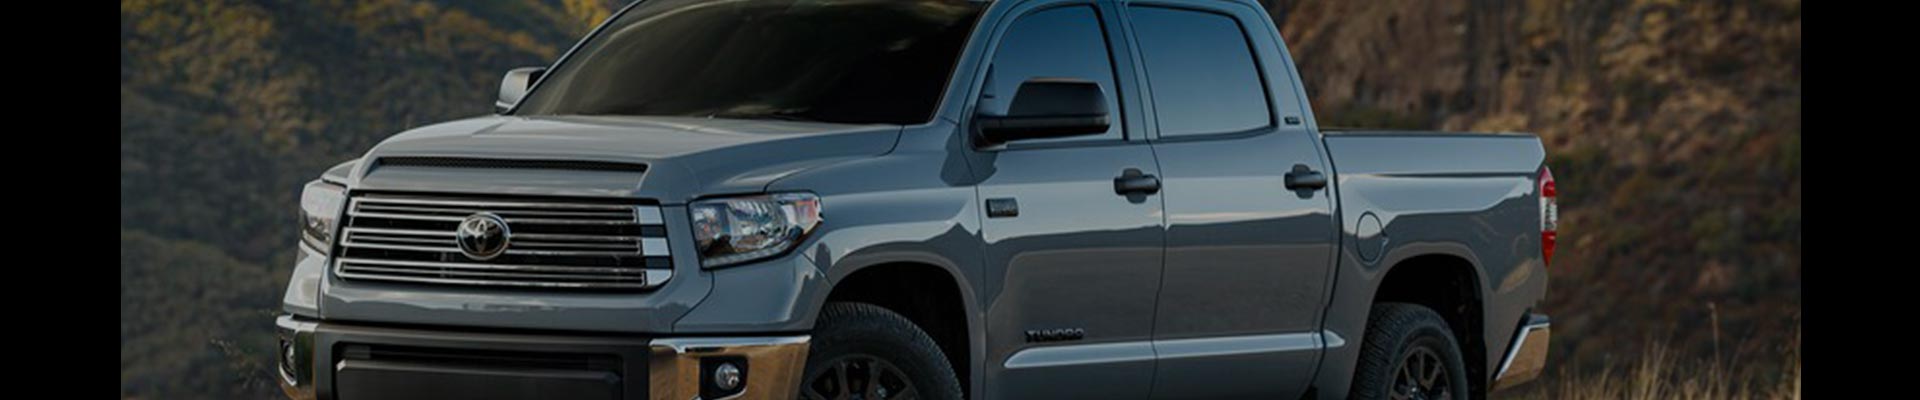 Shop Replacement and OEM 2021 Toyota Tundra Parts with Discounted Price on the Net